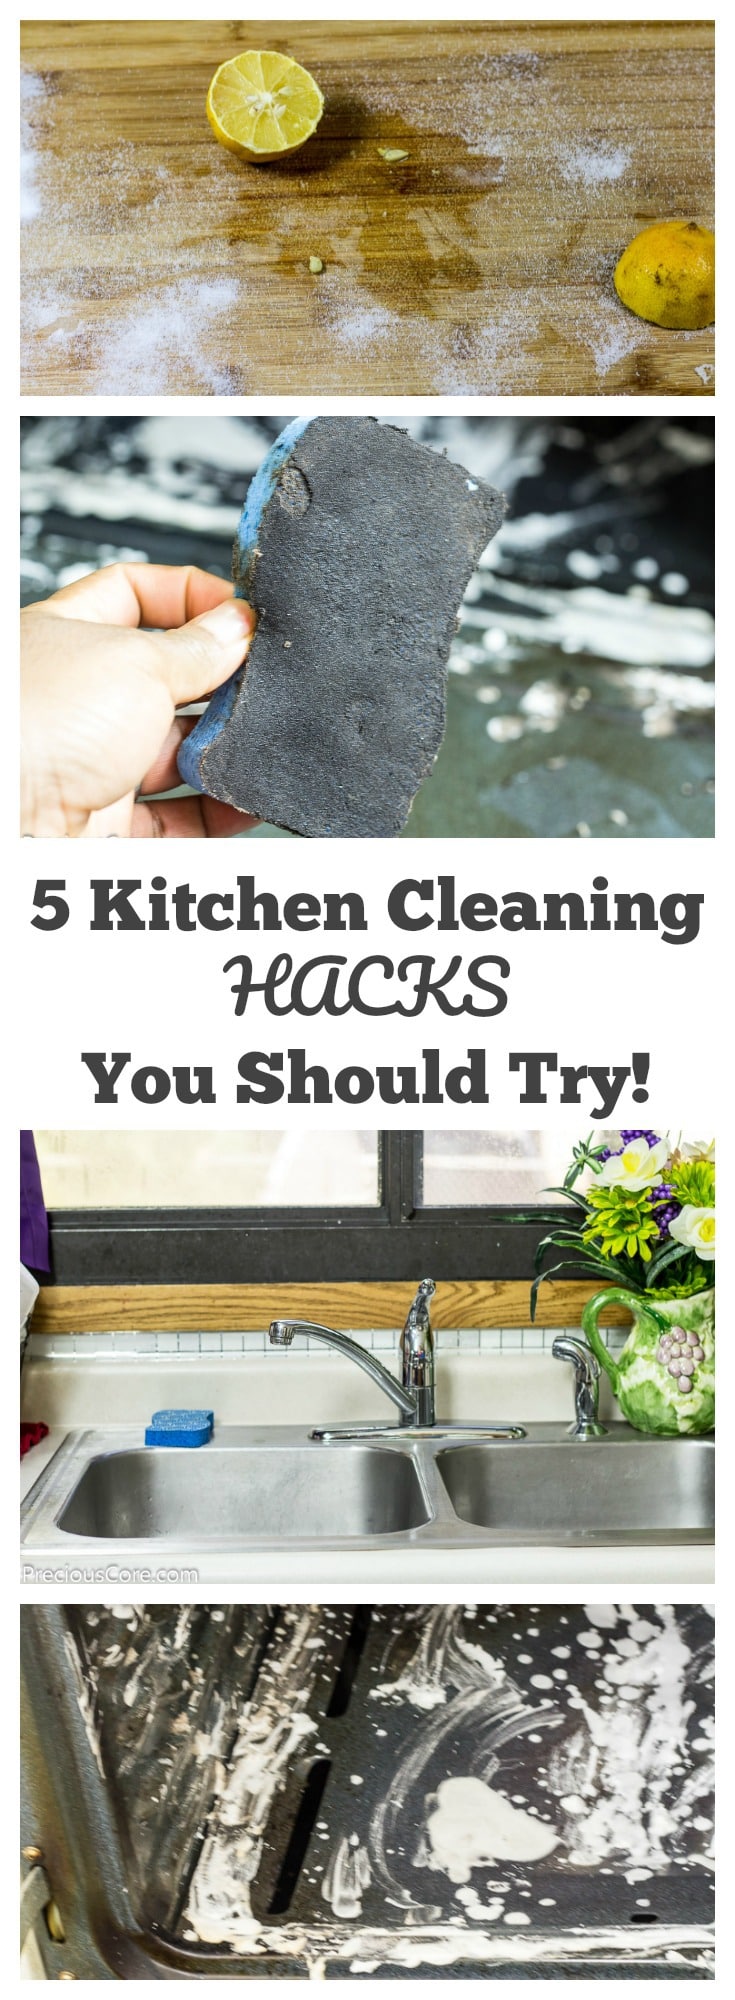 5 insanely good and easy kitchen cleaning hacks. Your kitchen will never be the same again when you try these hacks on PreciousCore.com